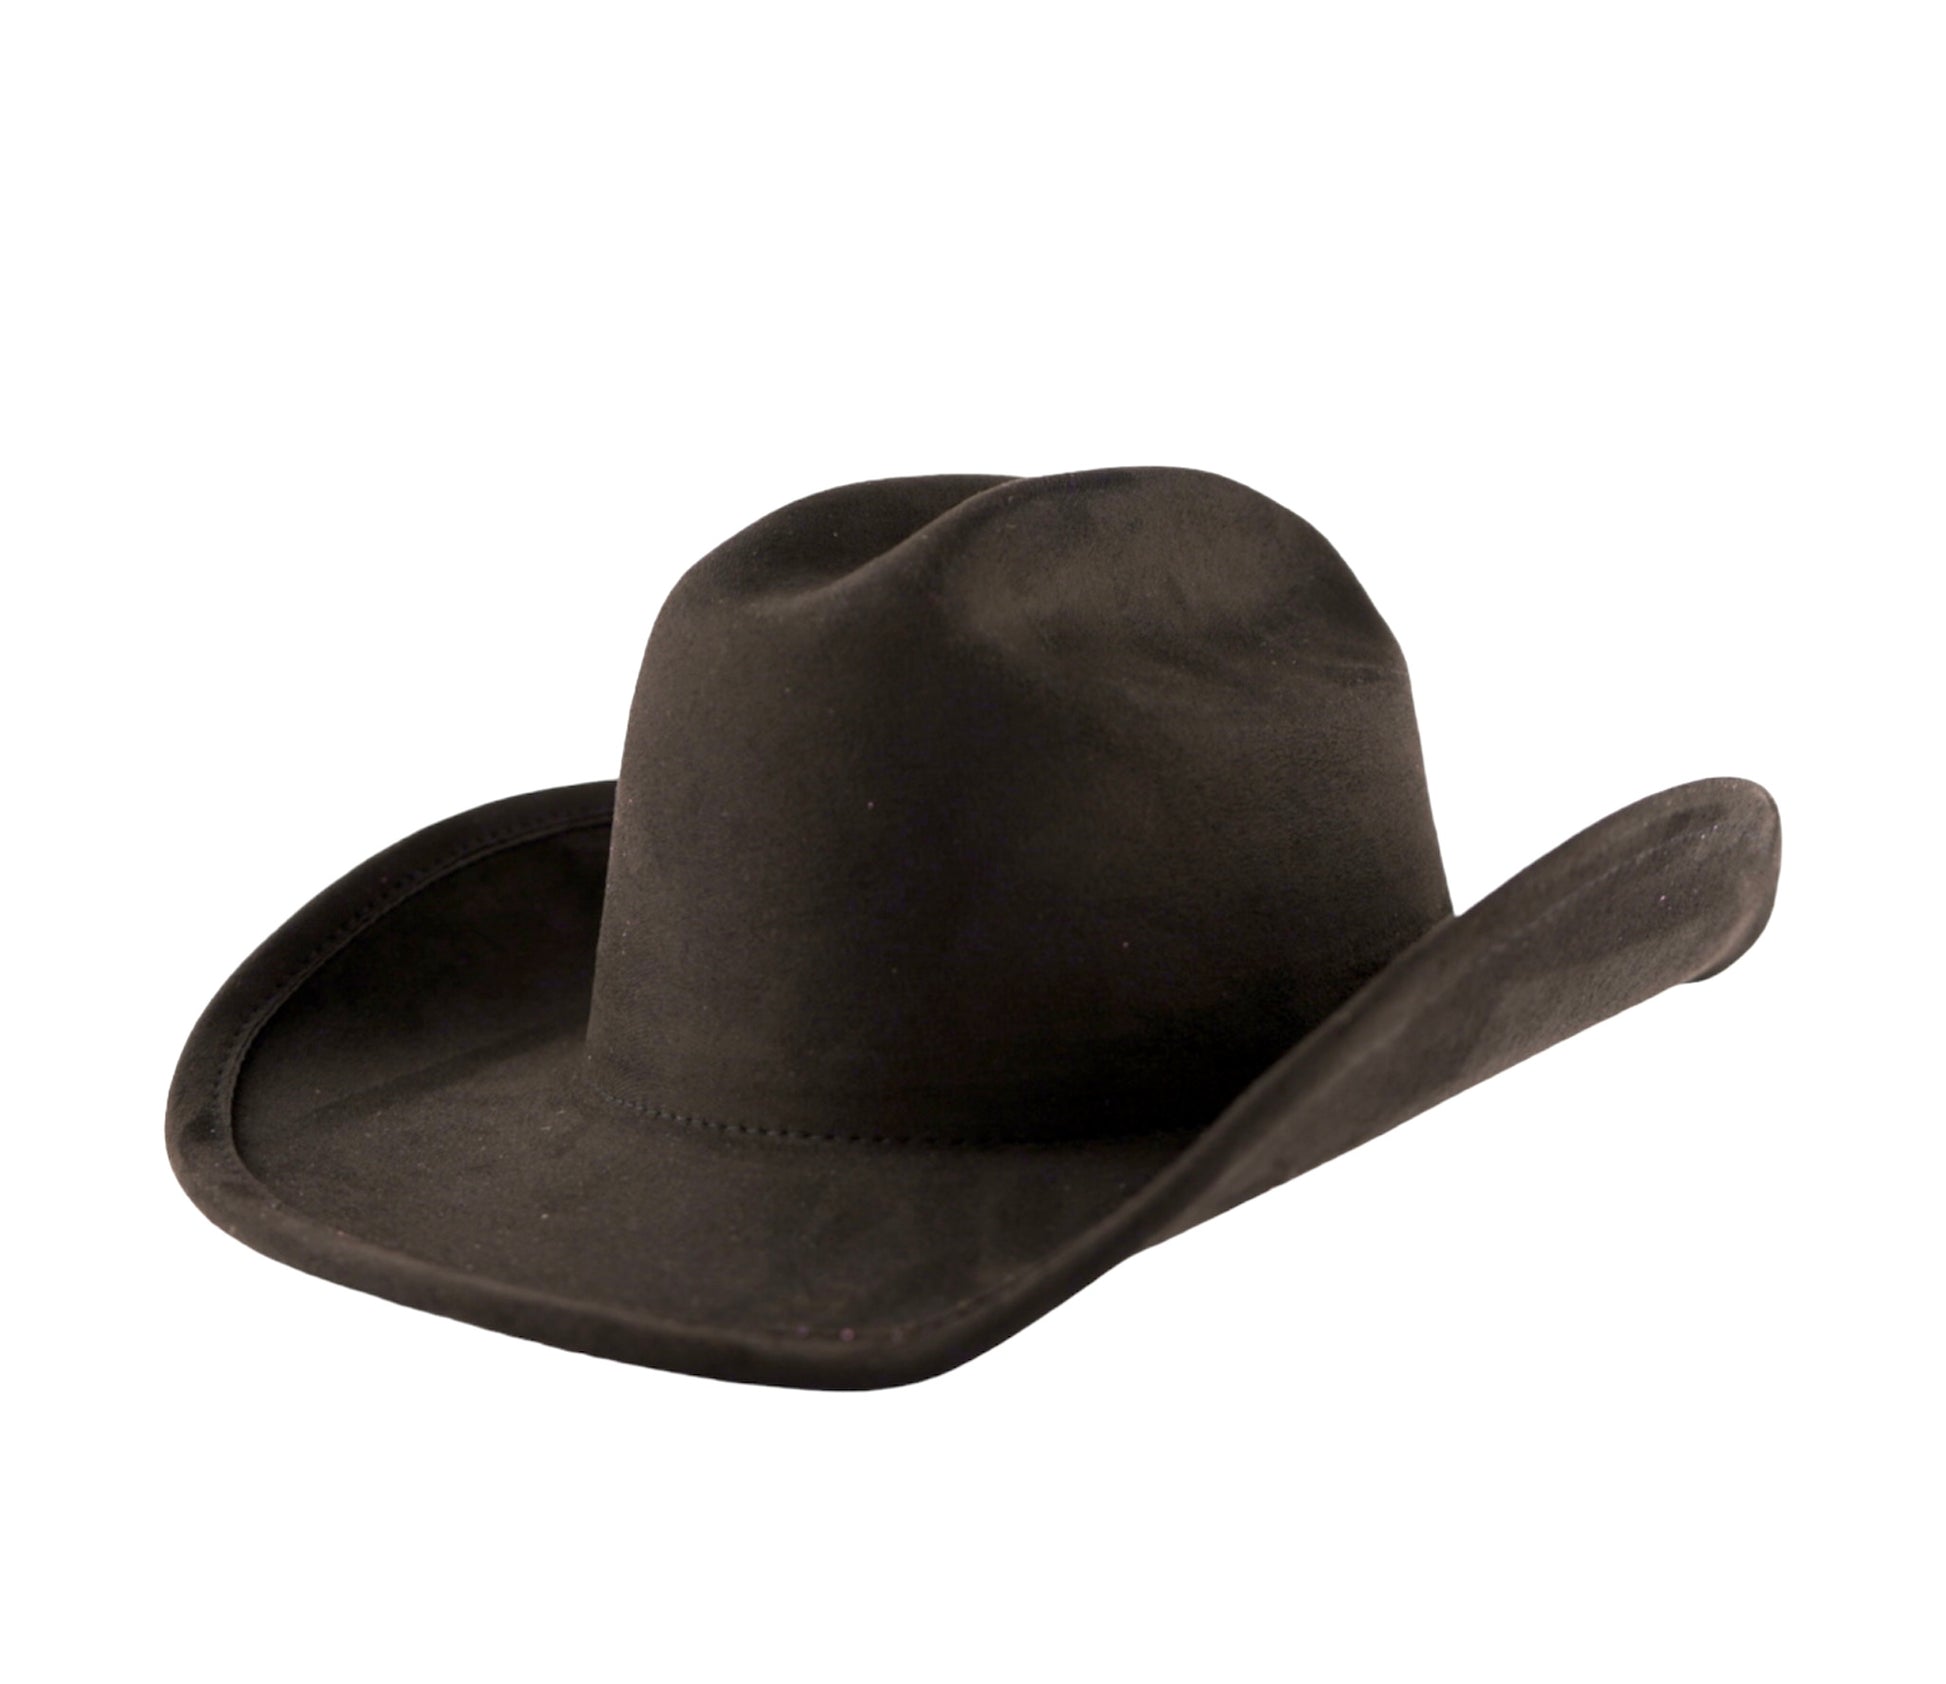 A faux suede cowgirl hat in black color.